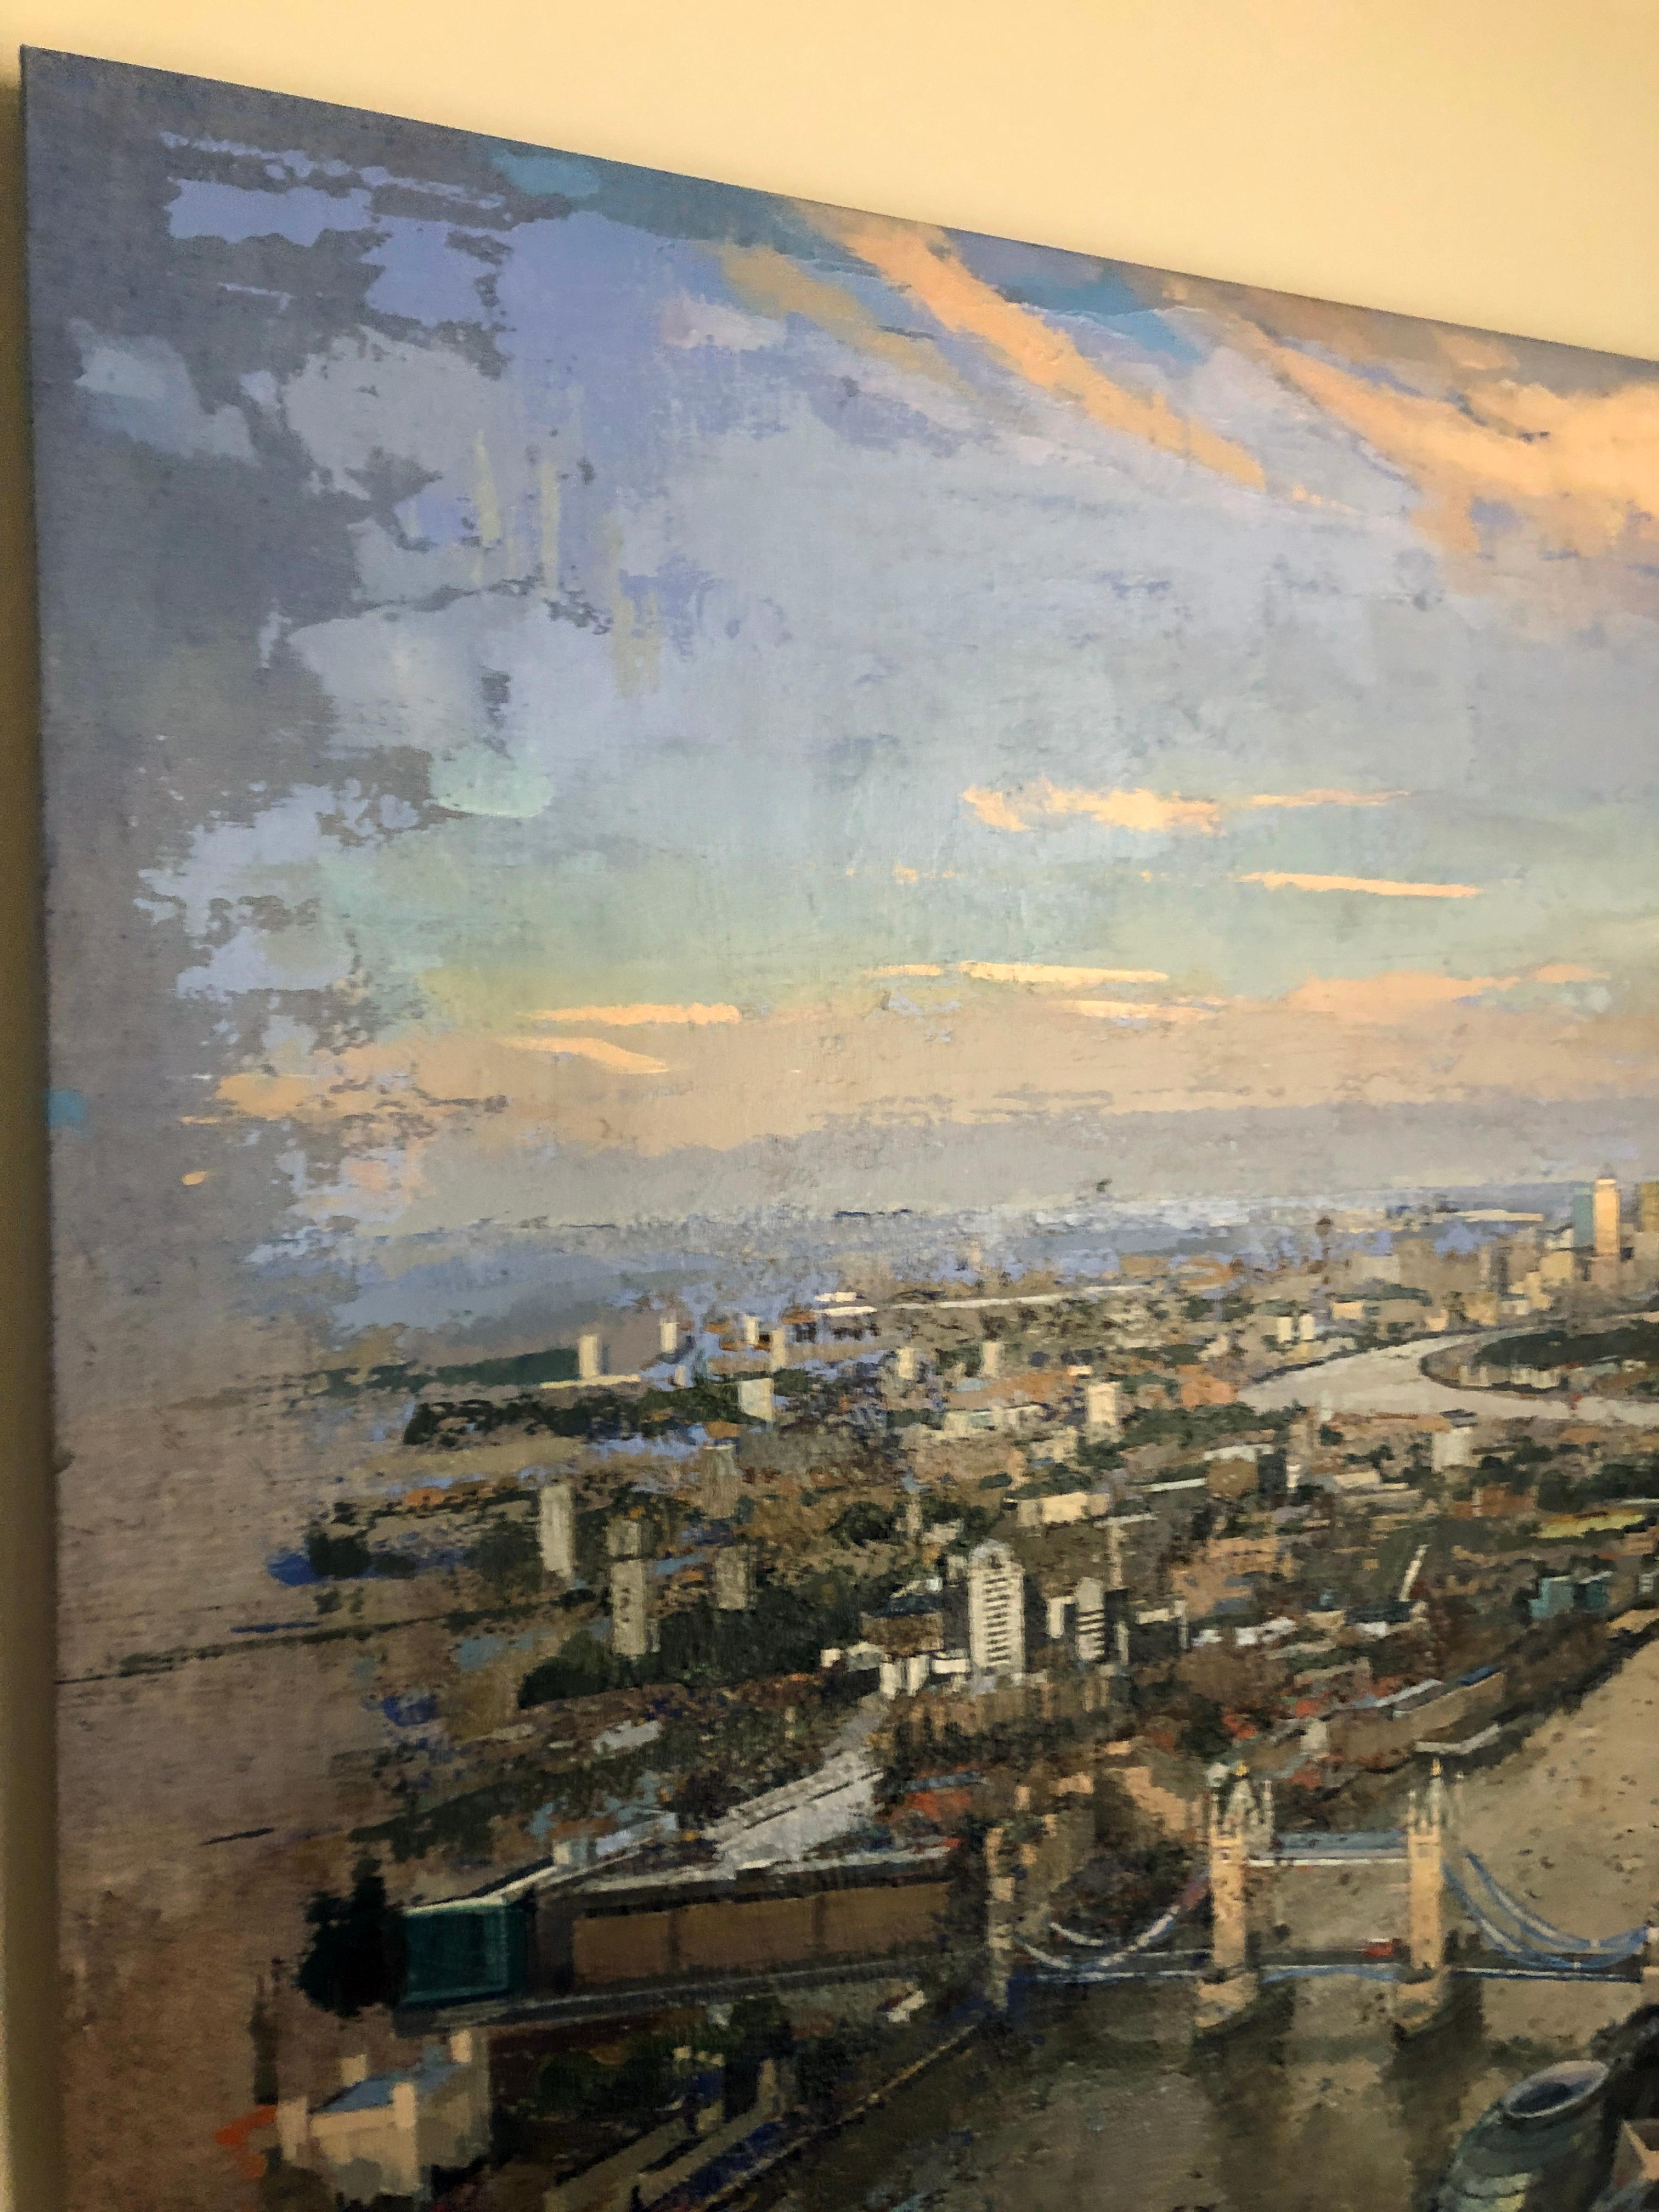 London Bridge - Original Painting on Linen, Areal View, Bridge and River Thames For Sale 2